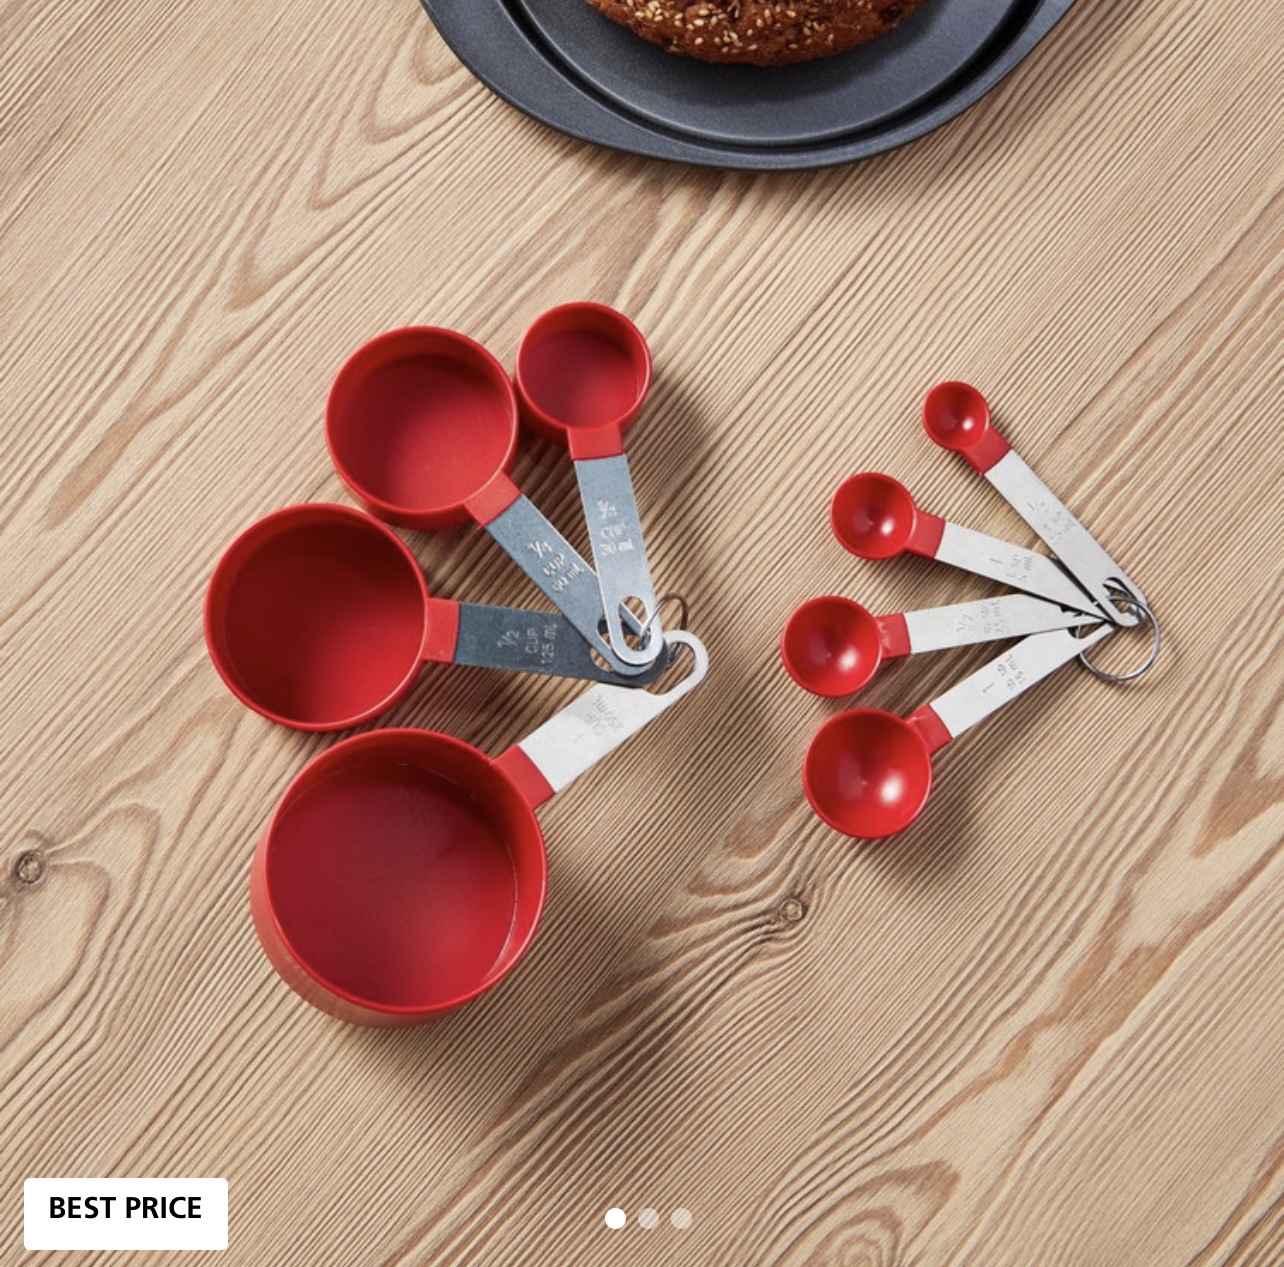 8-Piece Measuring Spoon and Cup Set, Red – Ofmax Homes